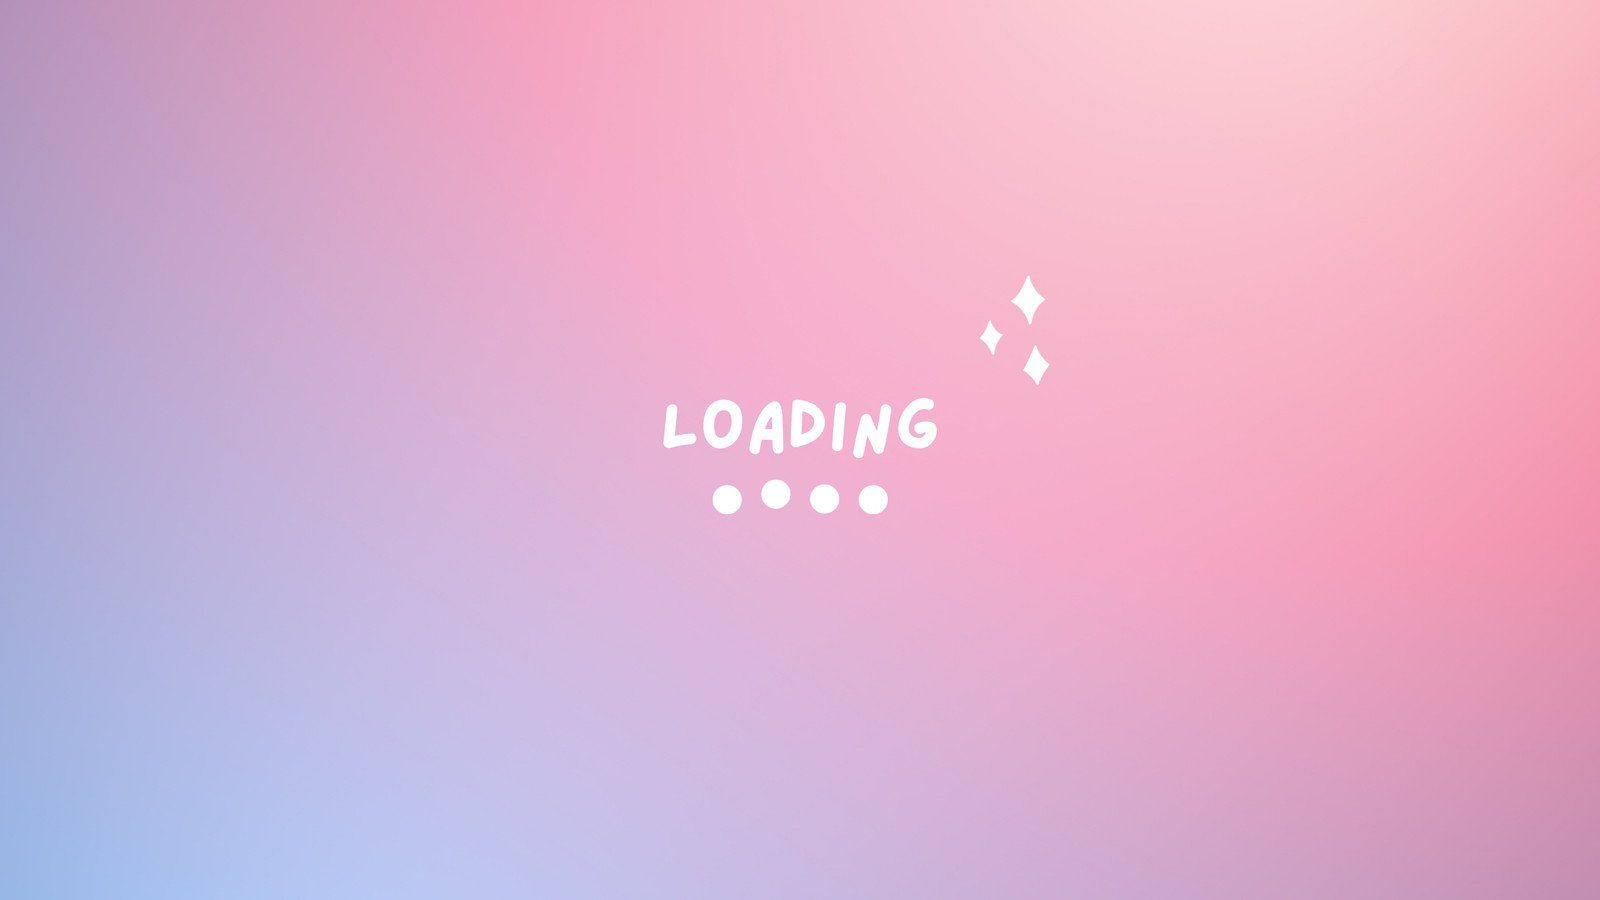 A loading bar with the word 